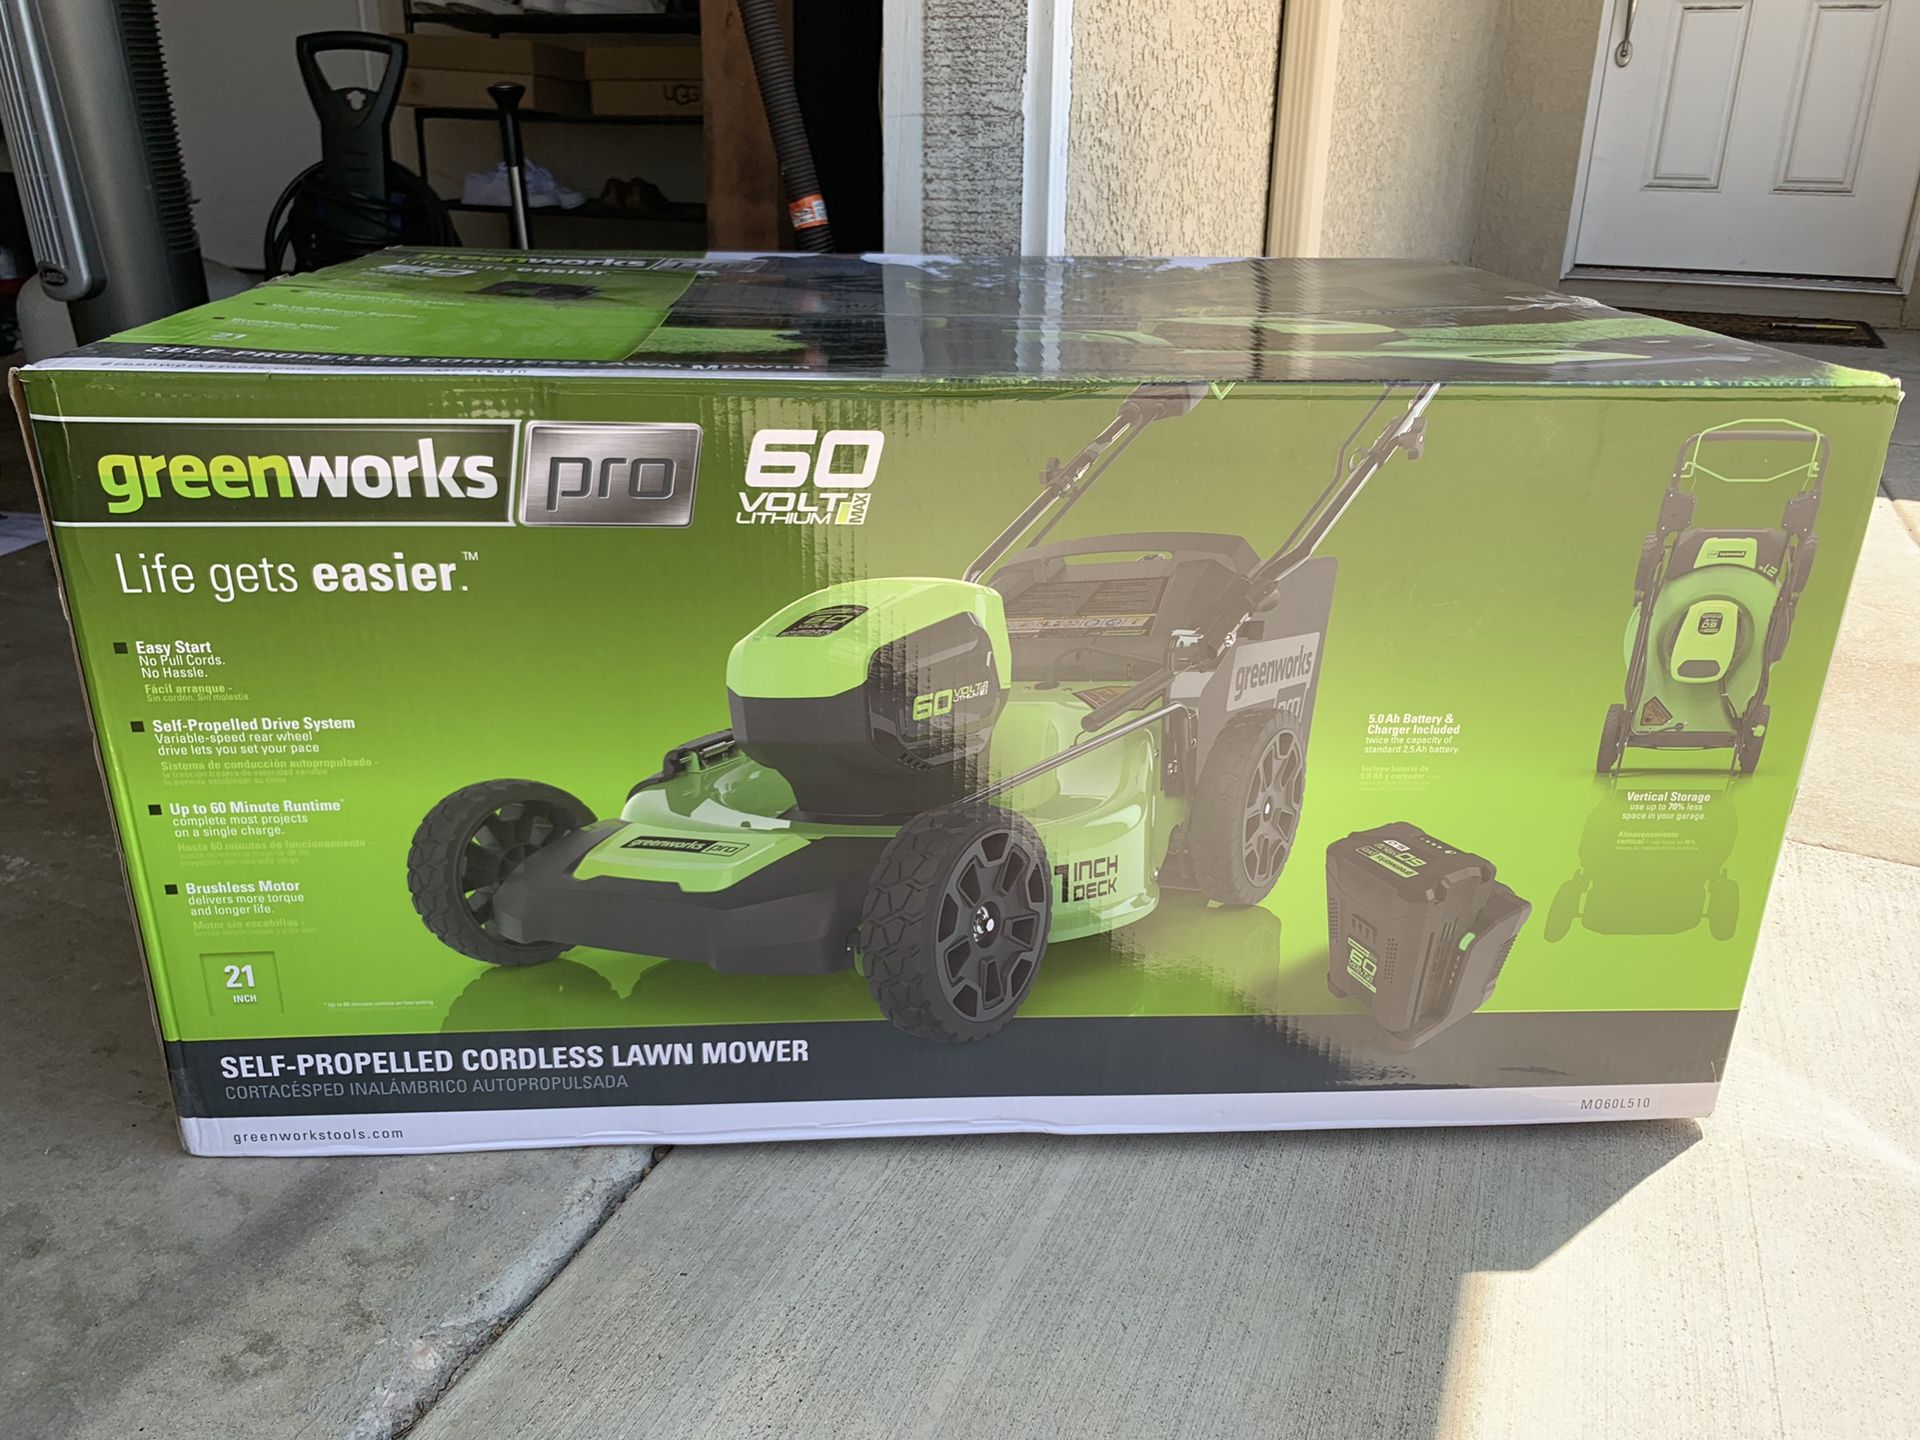 NEW Greenworks 60v self-propelled brushless electric lawn mower in unopened box